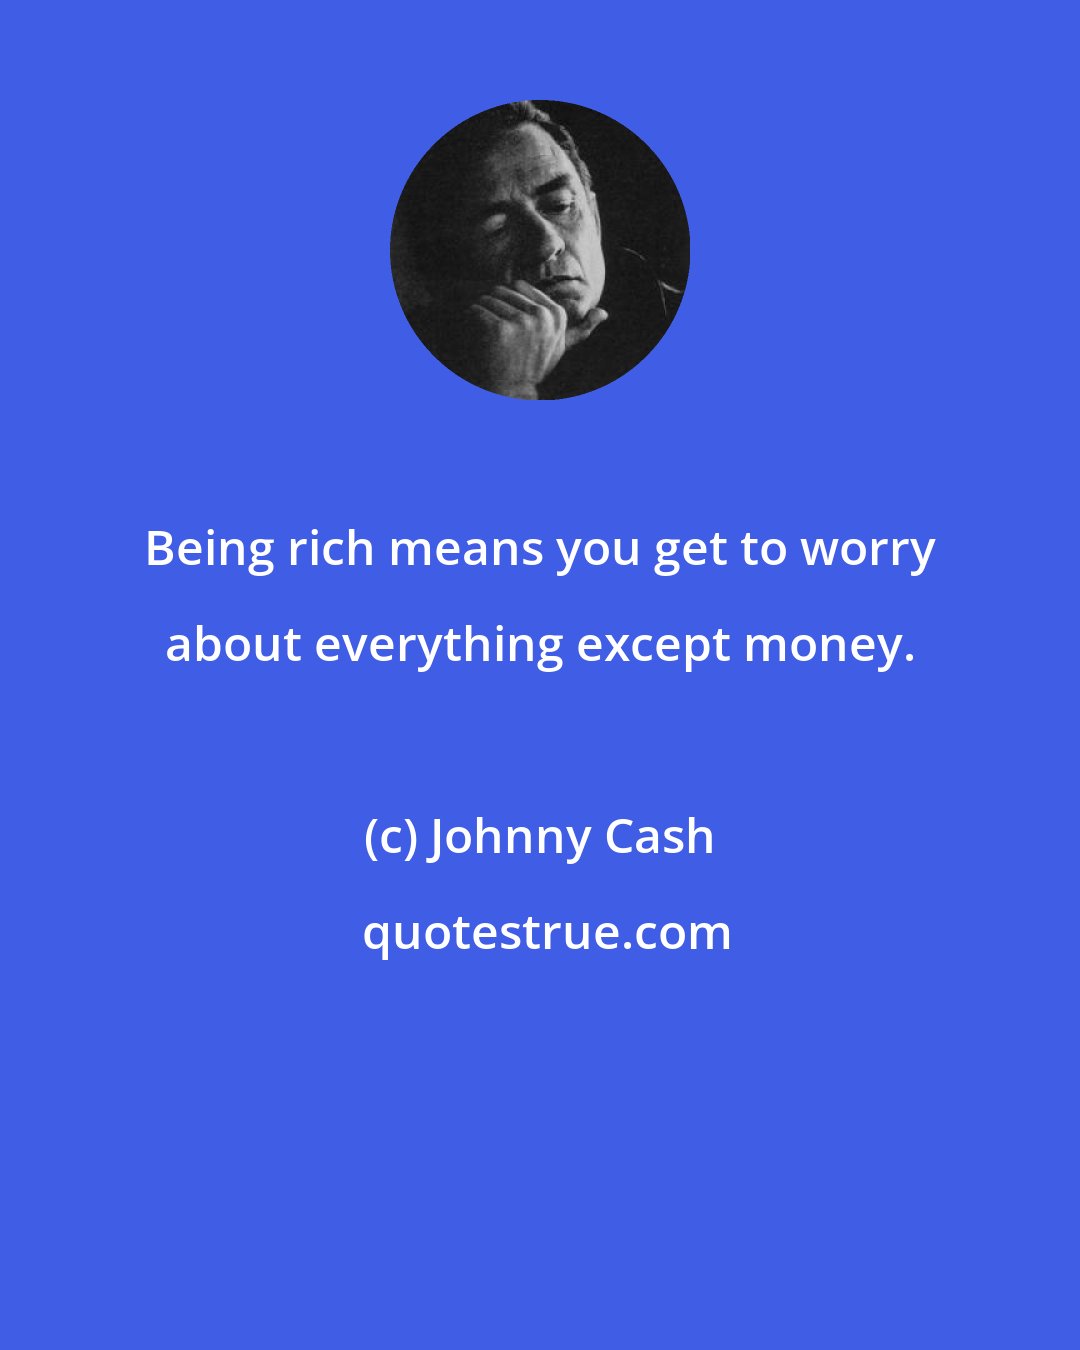 Johnny Cash: Being rich means you get to worry about everything except money.